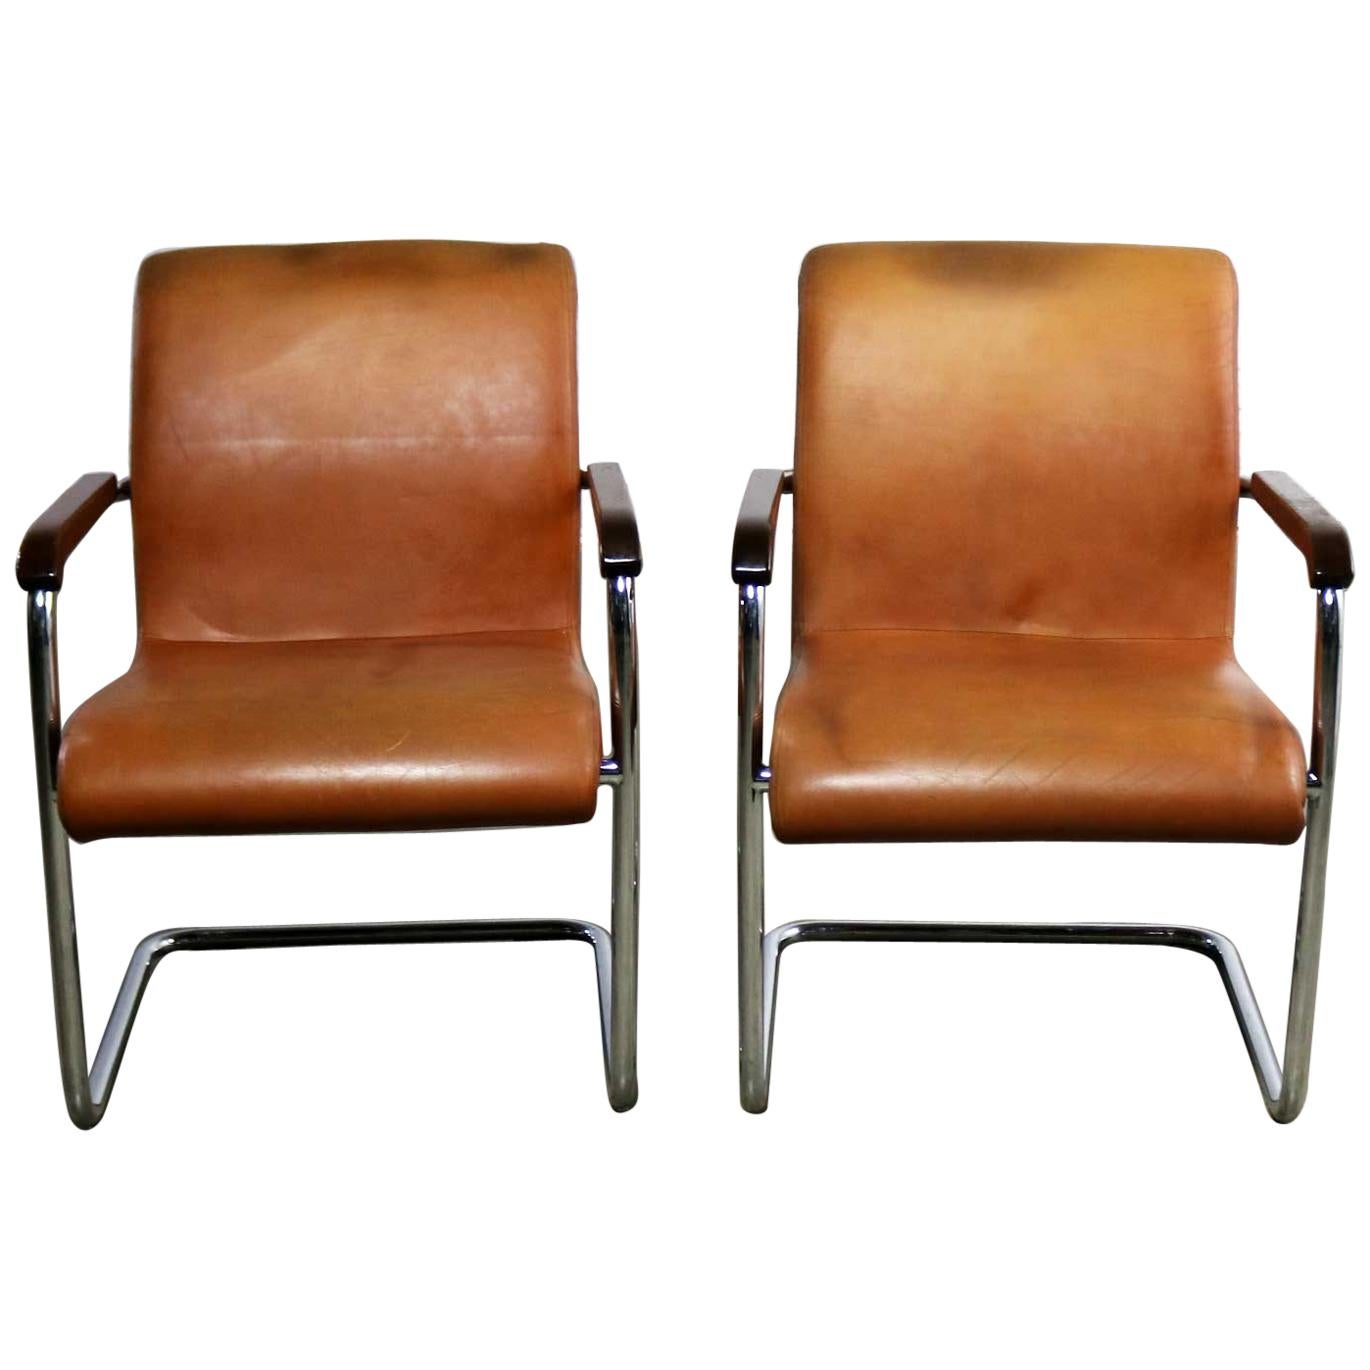 Cantilevered Chrome Cognac Leather Chairs Mid-Century Modern